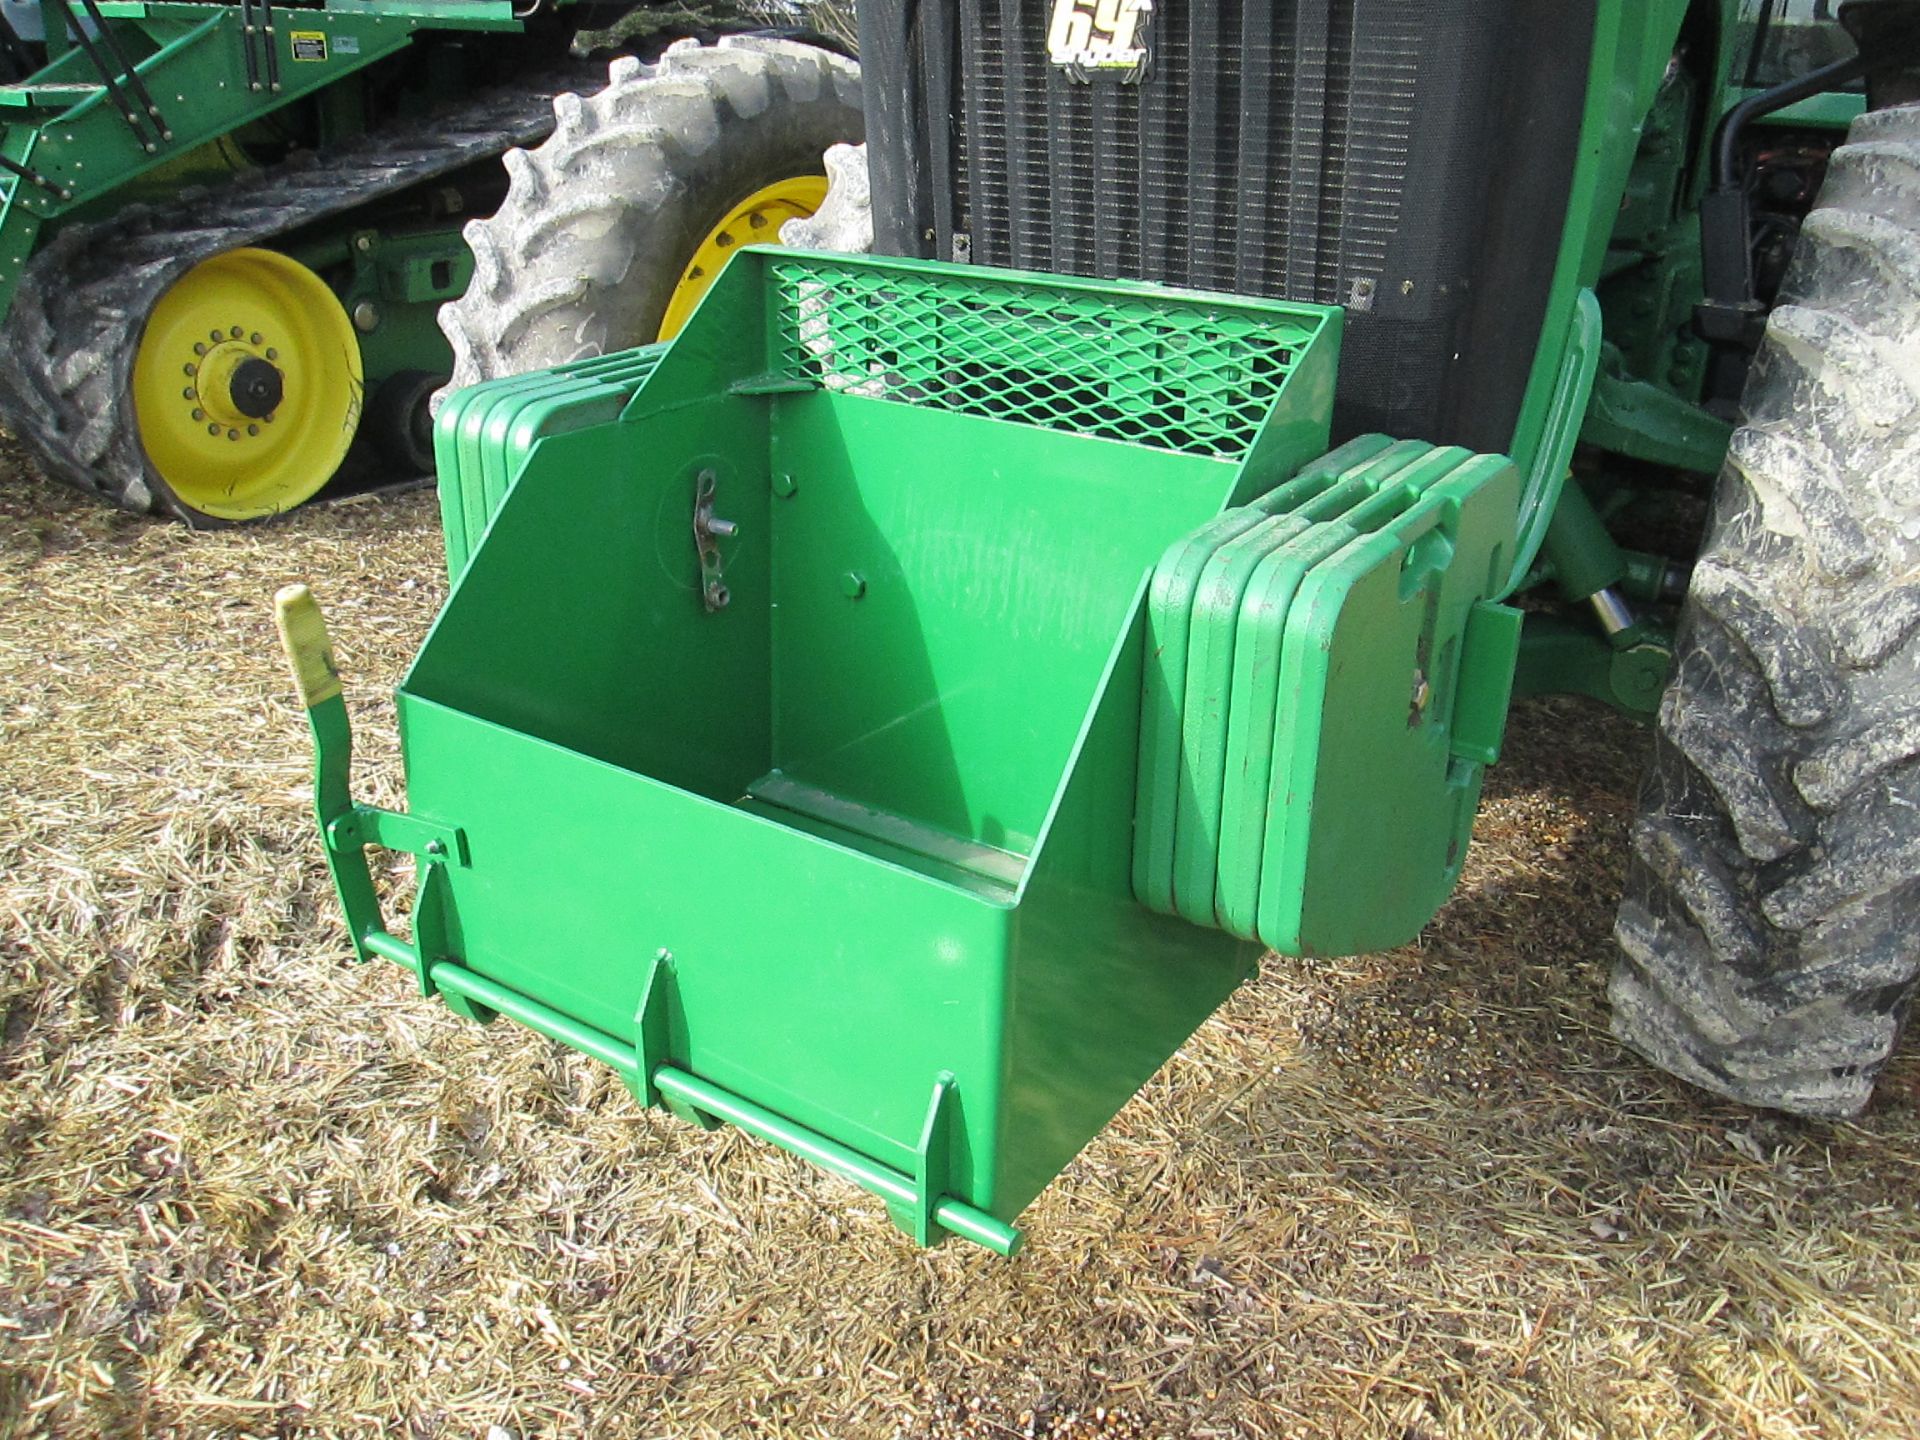 ’02 JD 8420 MFWD,(SN RW8420P007155)P.S.,FRONT SUSPENSION,GREENSTAR READY,480X50 DUALS,4921 HRS. - Image 13 of 19